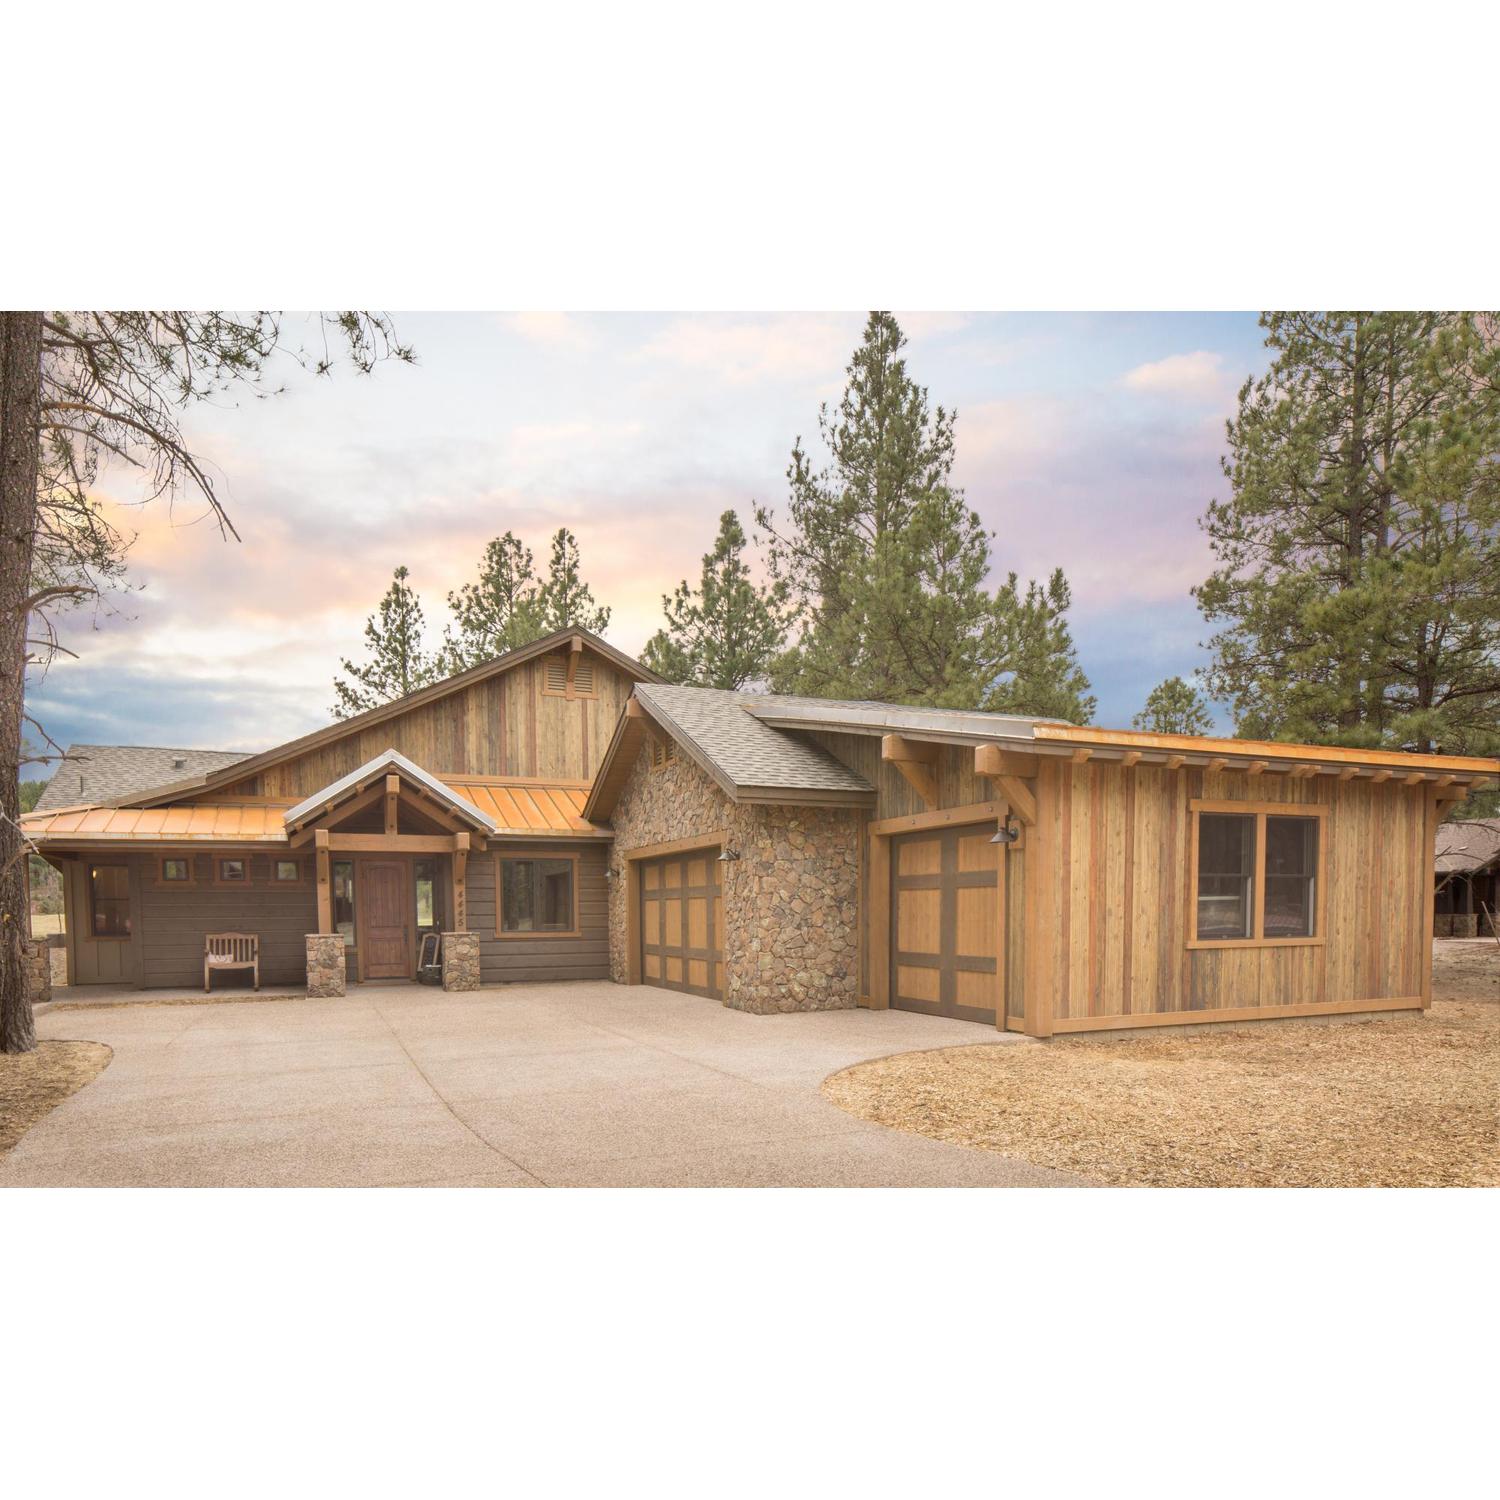 Flagstaff Houses for Sale and Flagstaff Real Estate Listings - HomeGain